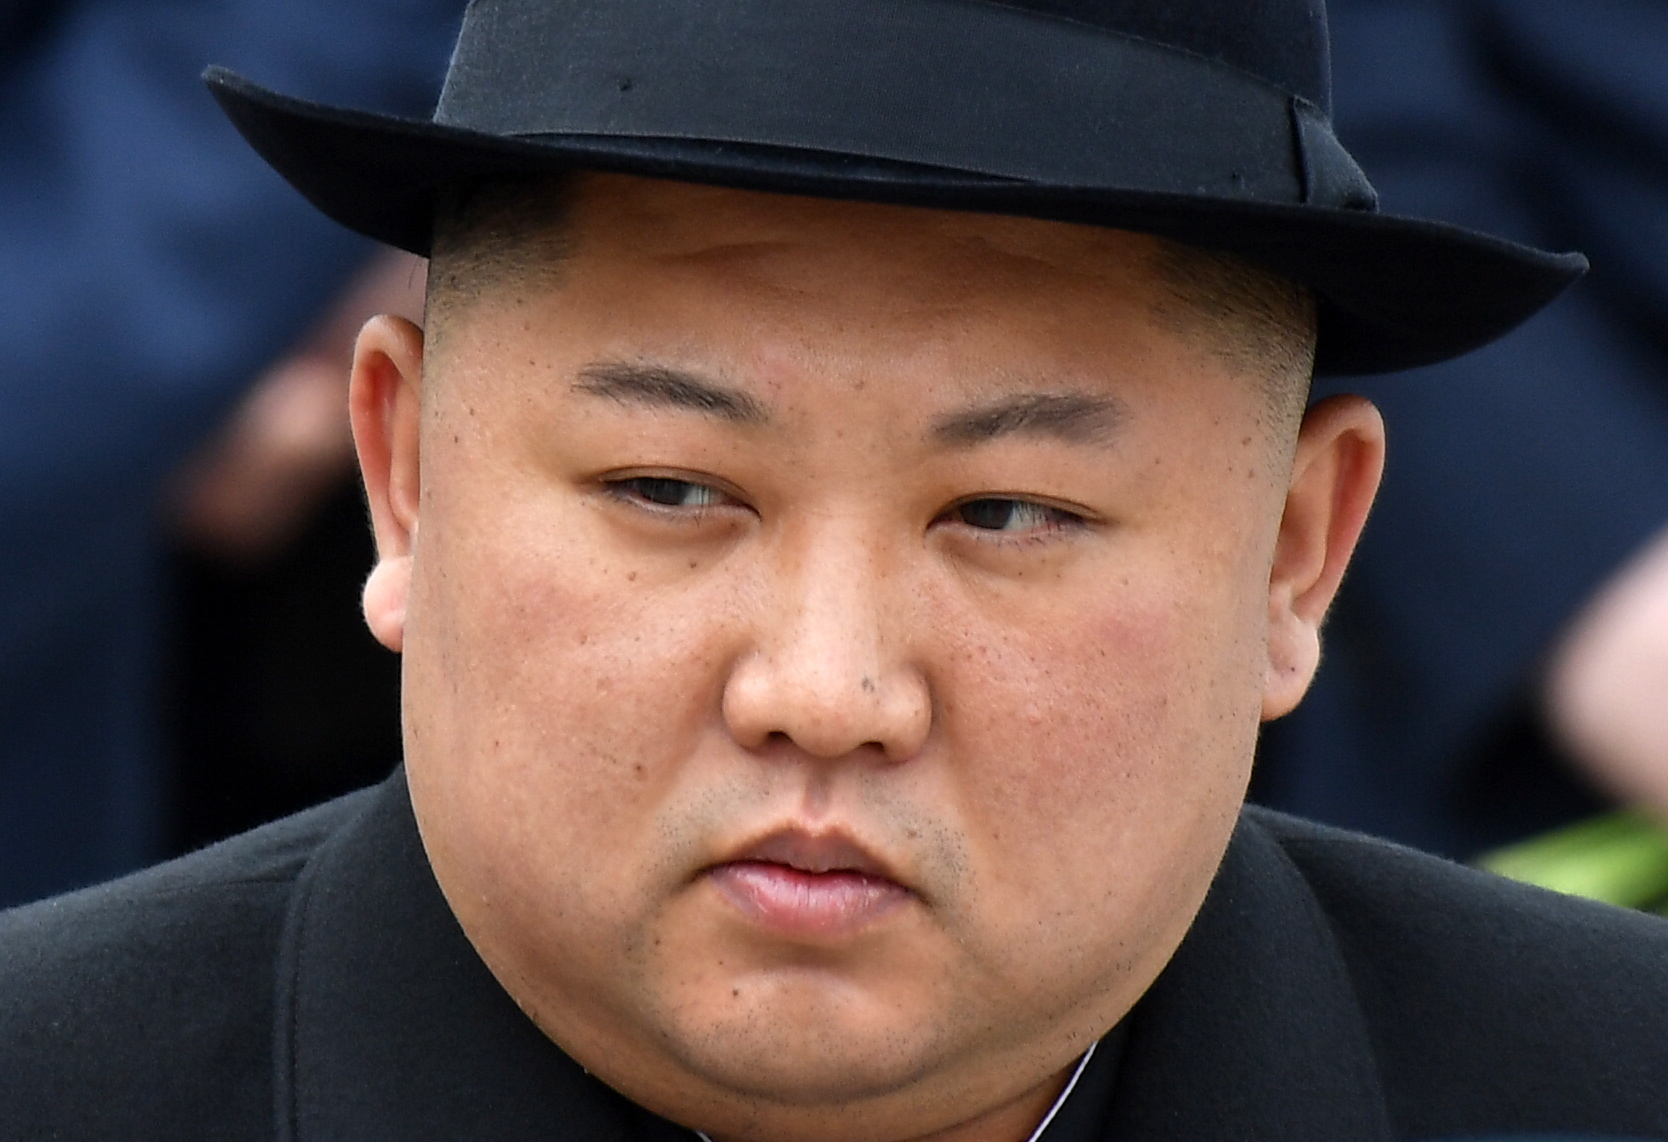 North Korean leader Kim Jong Un before his departure from a railway station in Russia on April 26, 2019.